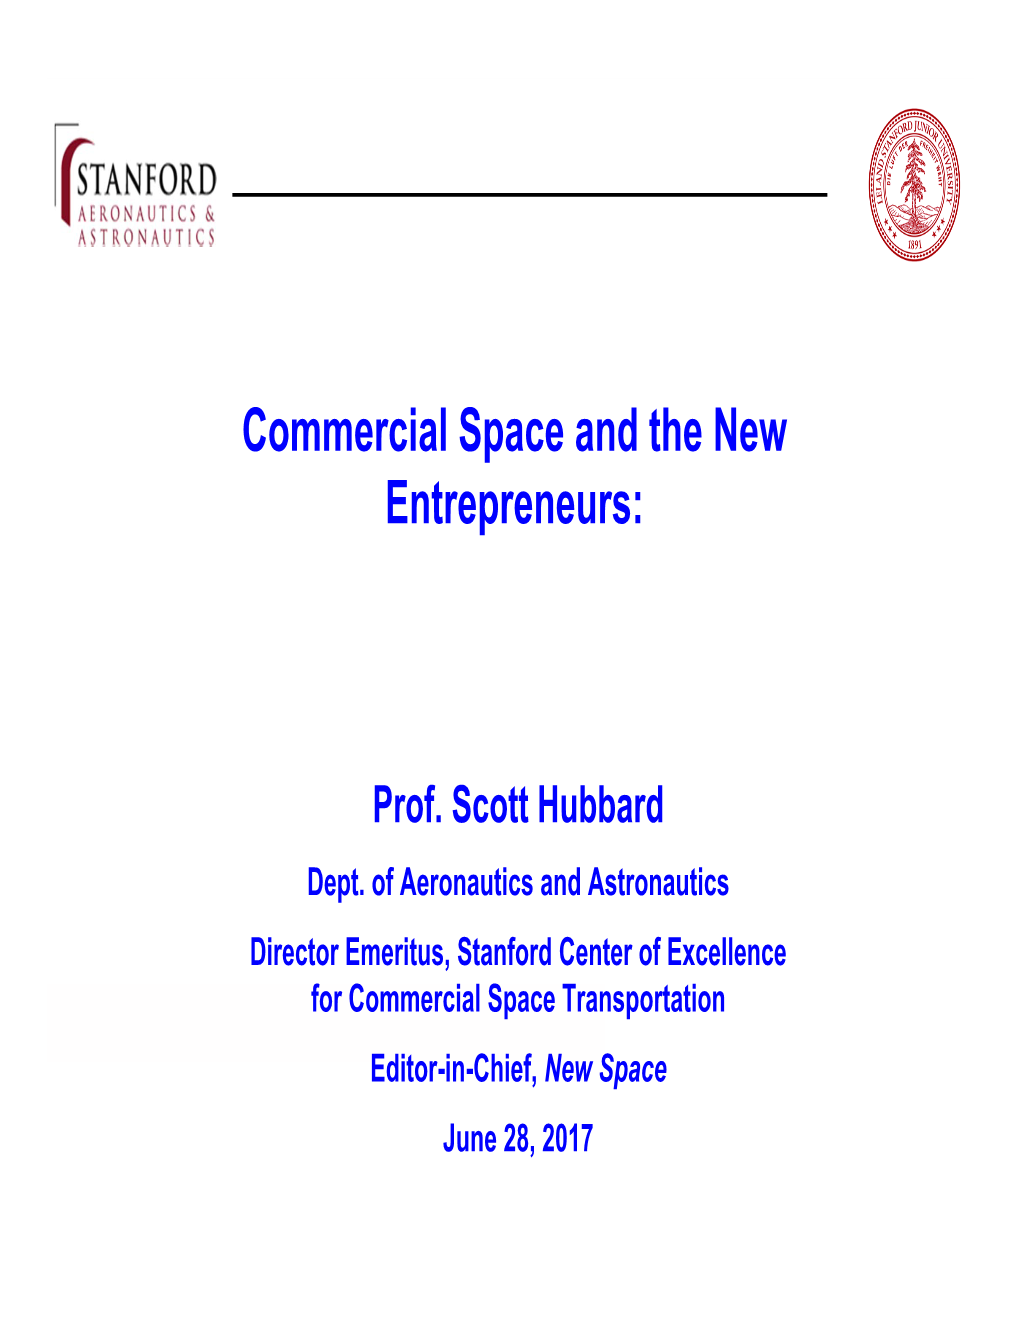 Commercial Space and the New Entrepreneurs